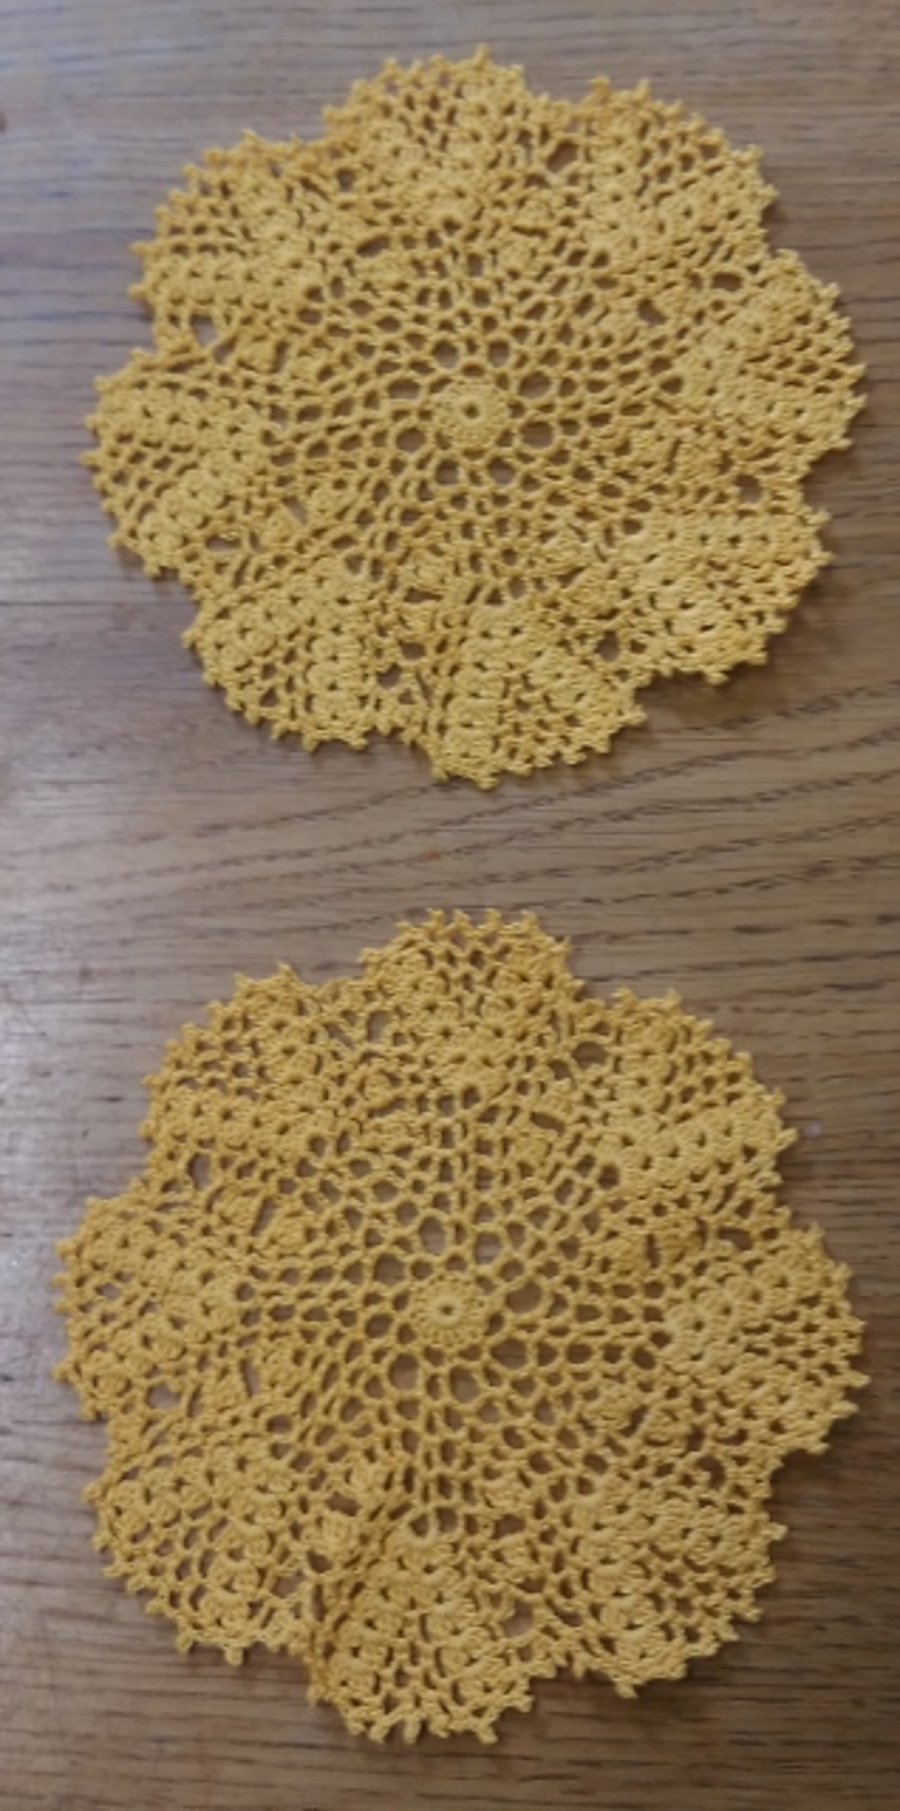 A PAIR OF GOLD TABLE MATS or DOILIES, 17cm LOVELY BRIGHT DECORATION FOR THE HOME